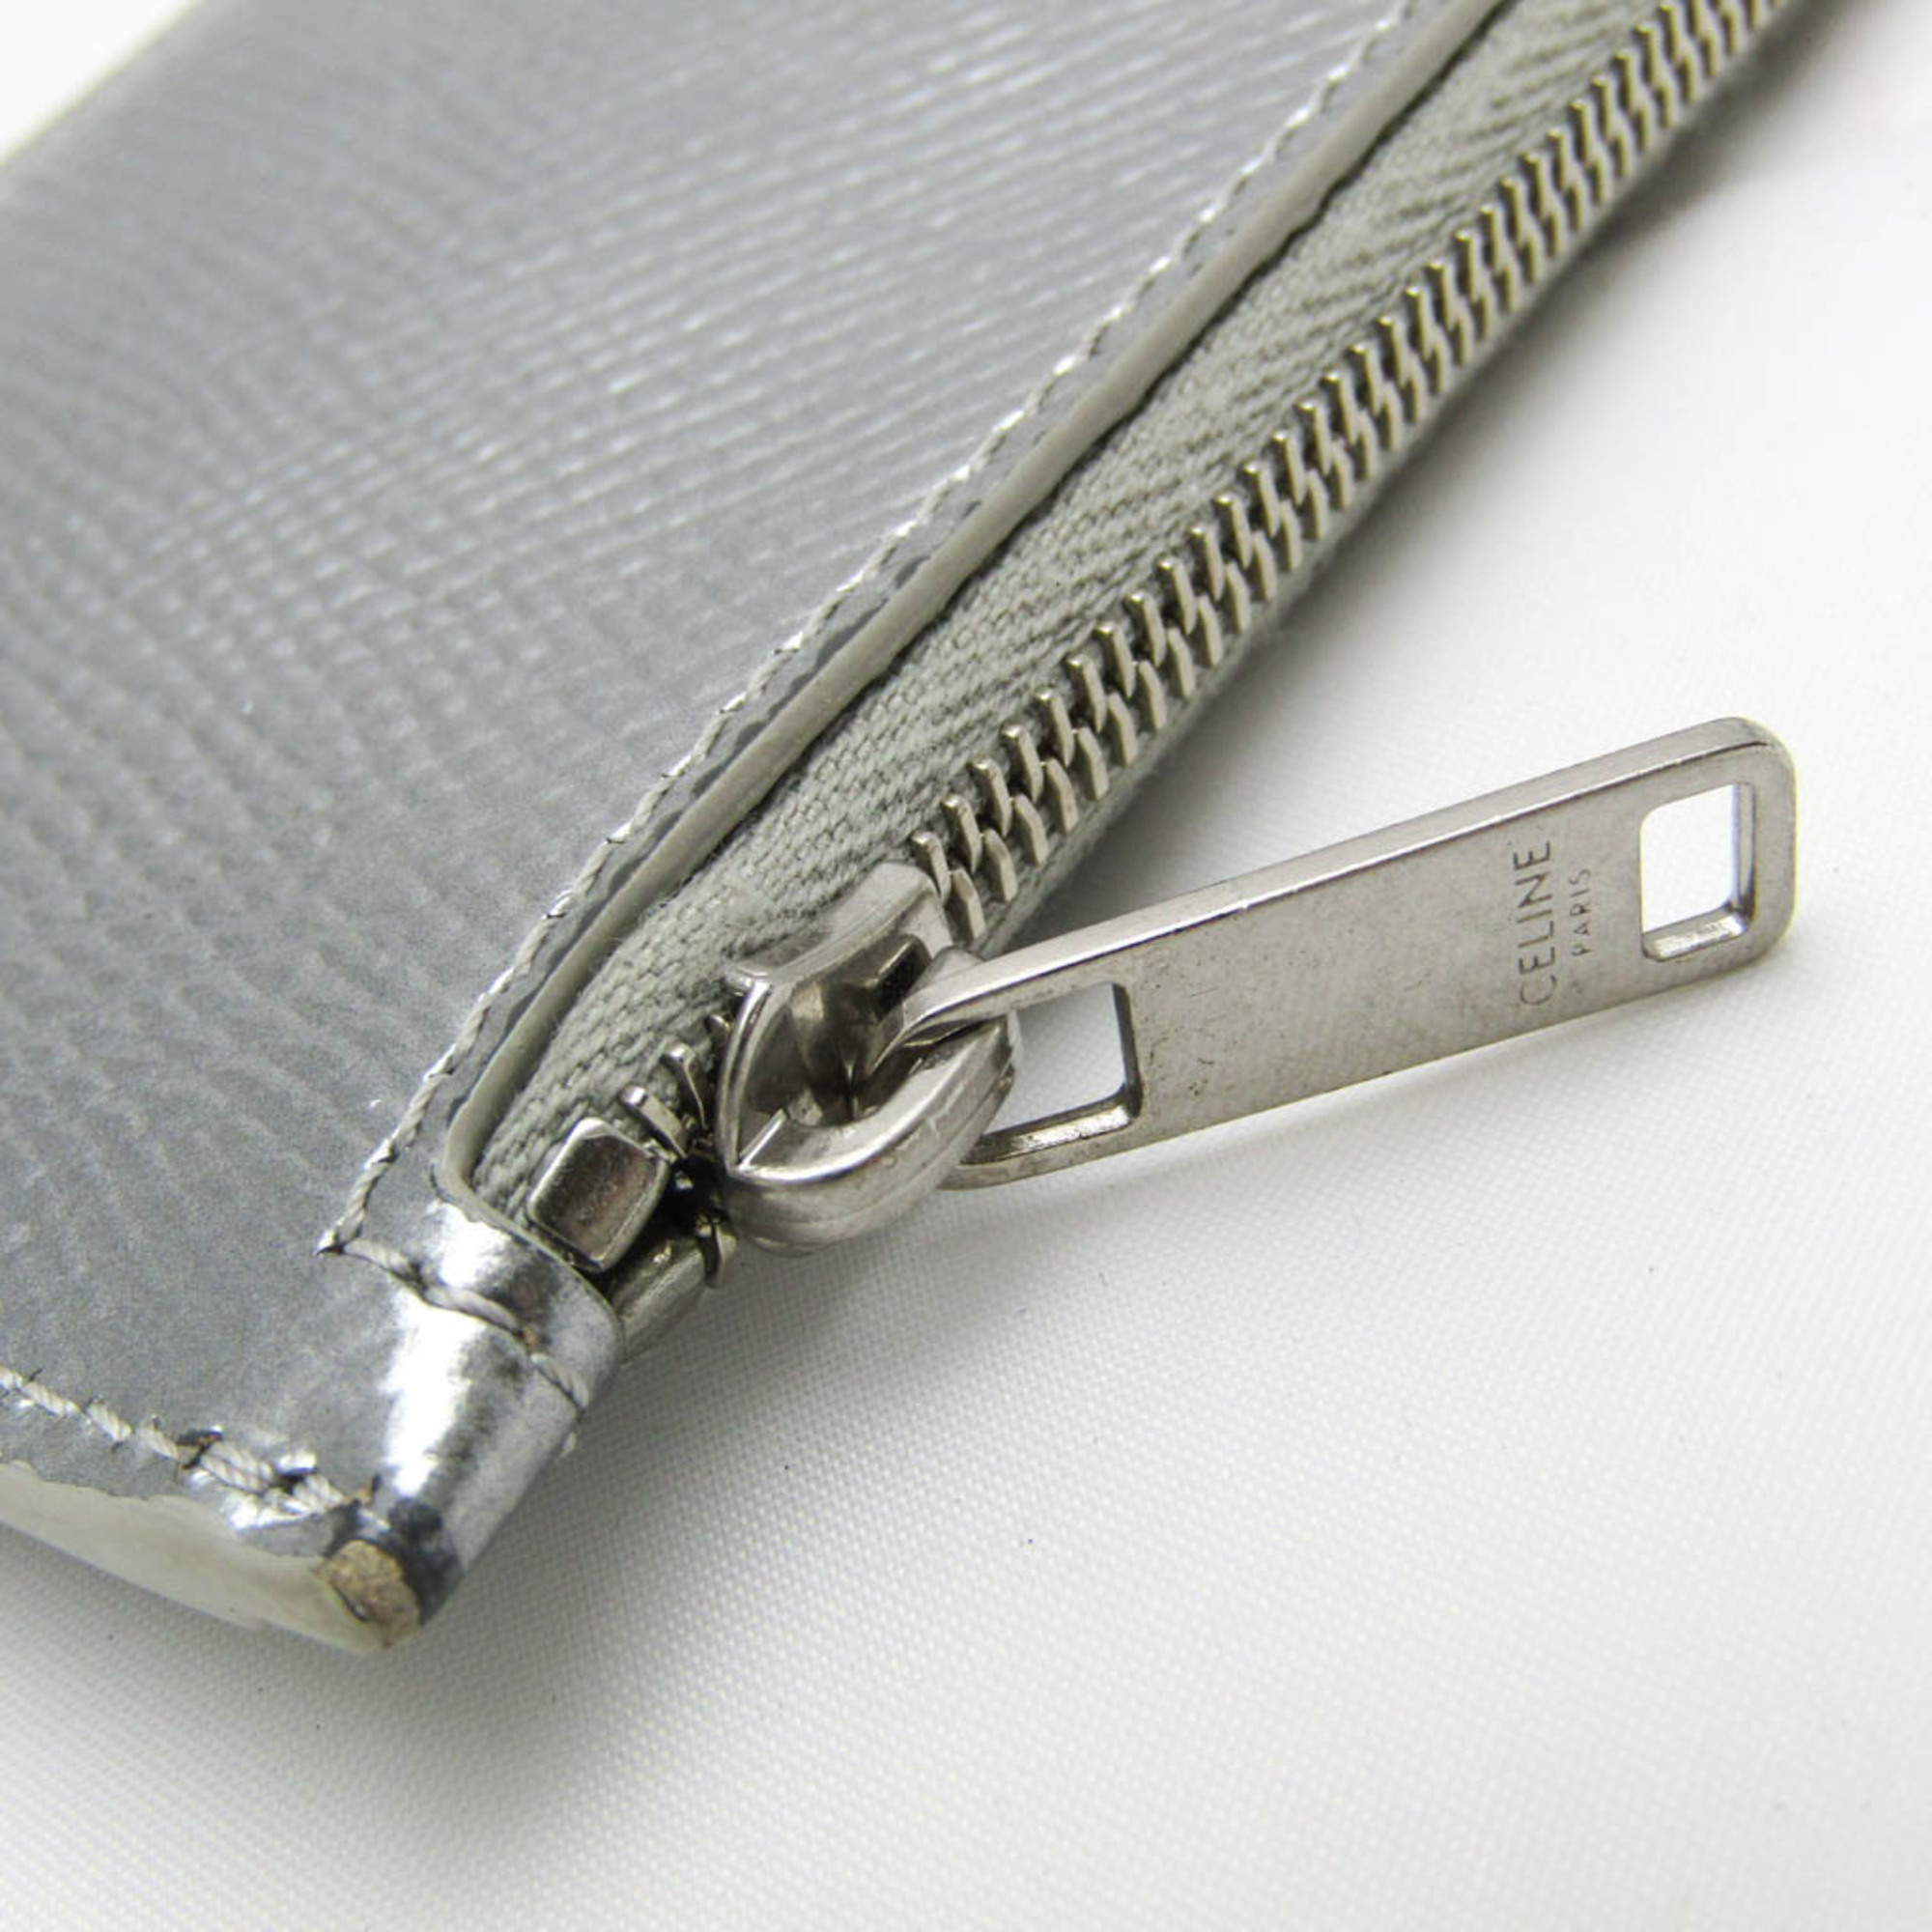 Celine Compact Zipped Card Holder 10B68 3BFQ Leather Card Case Silver